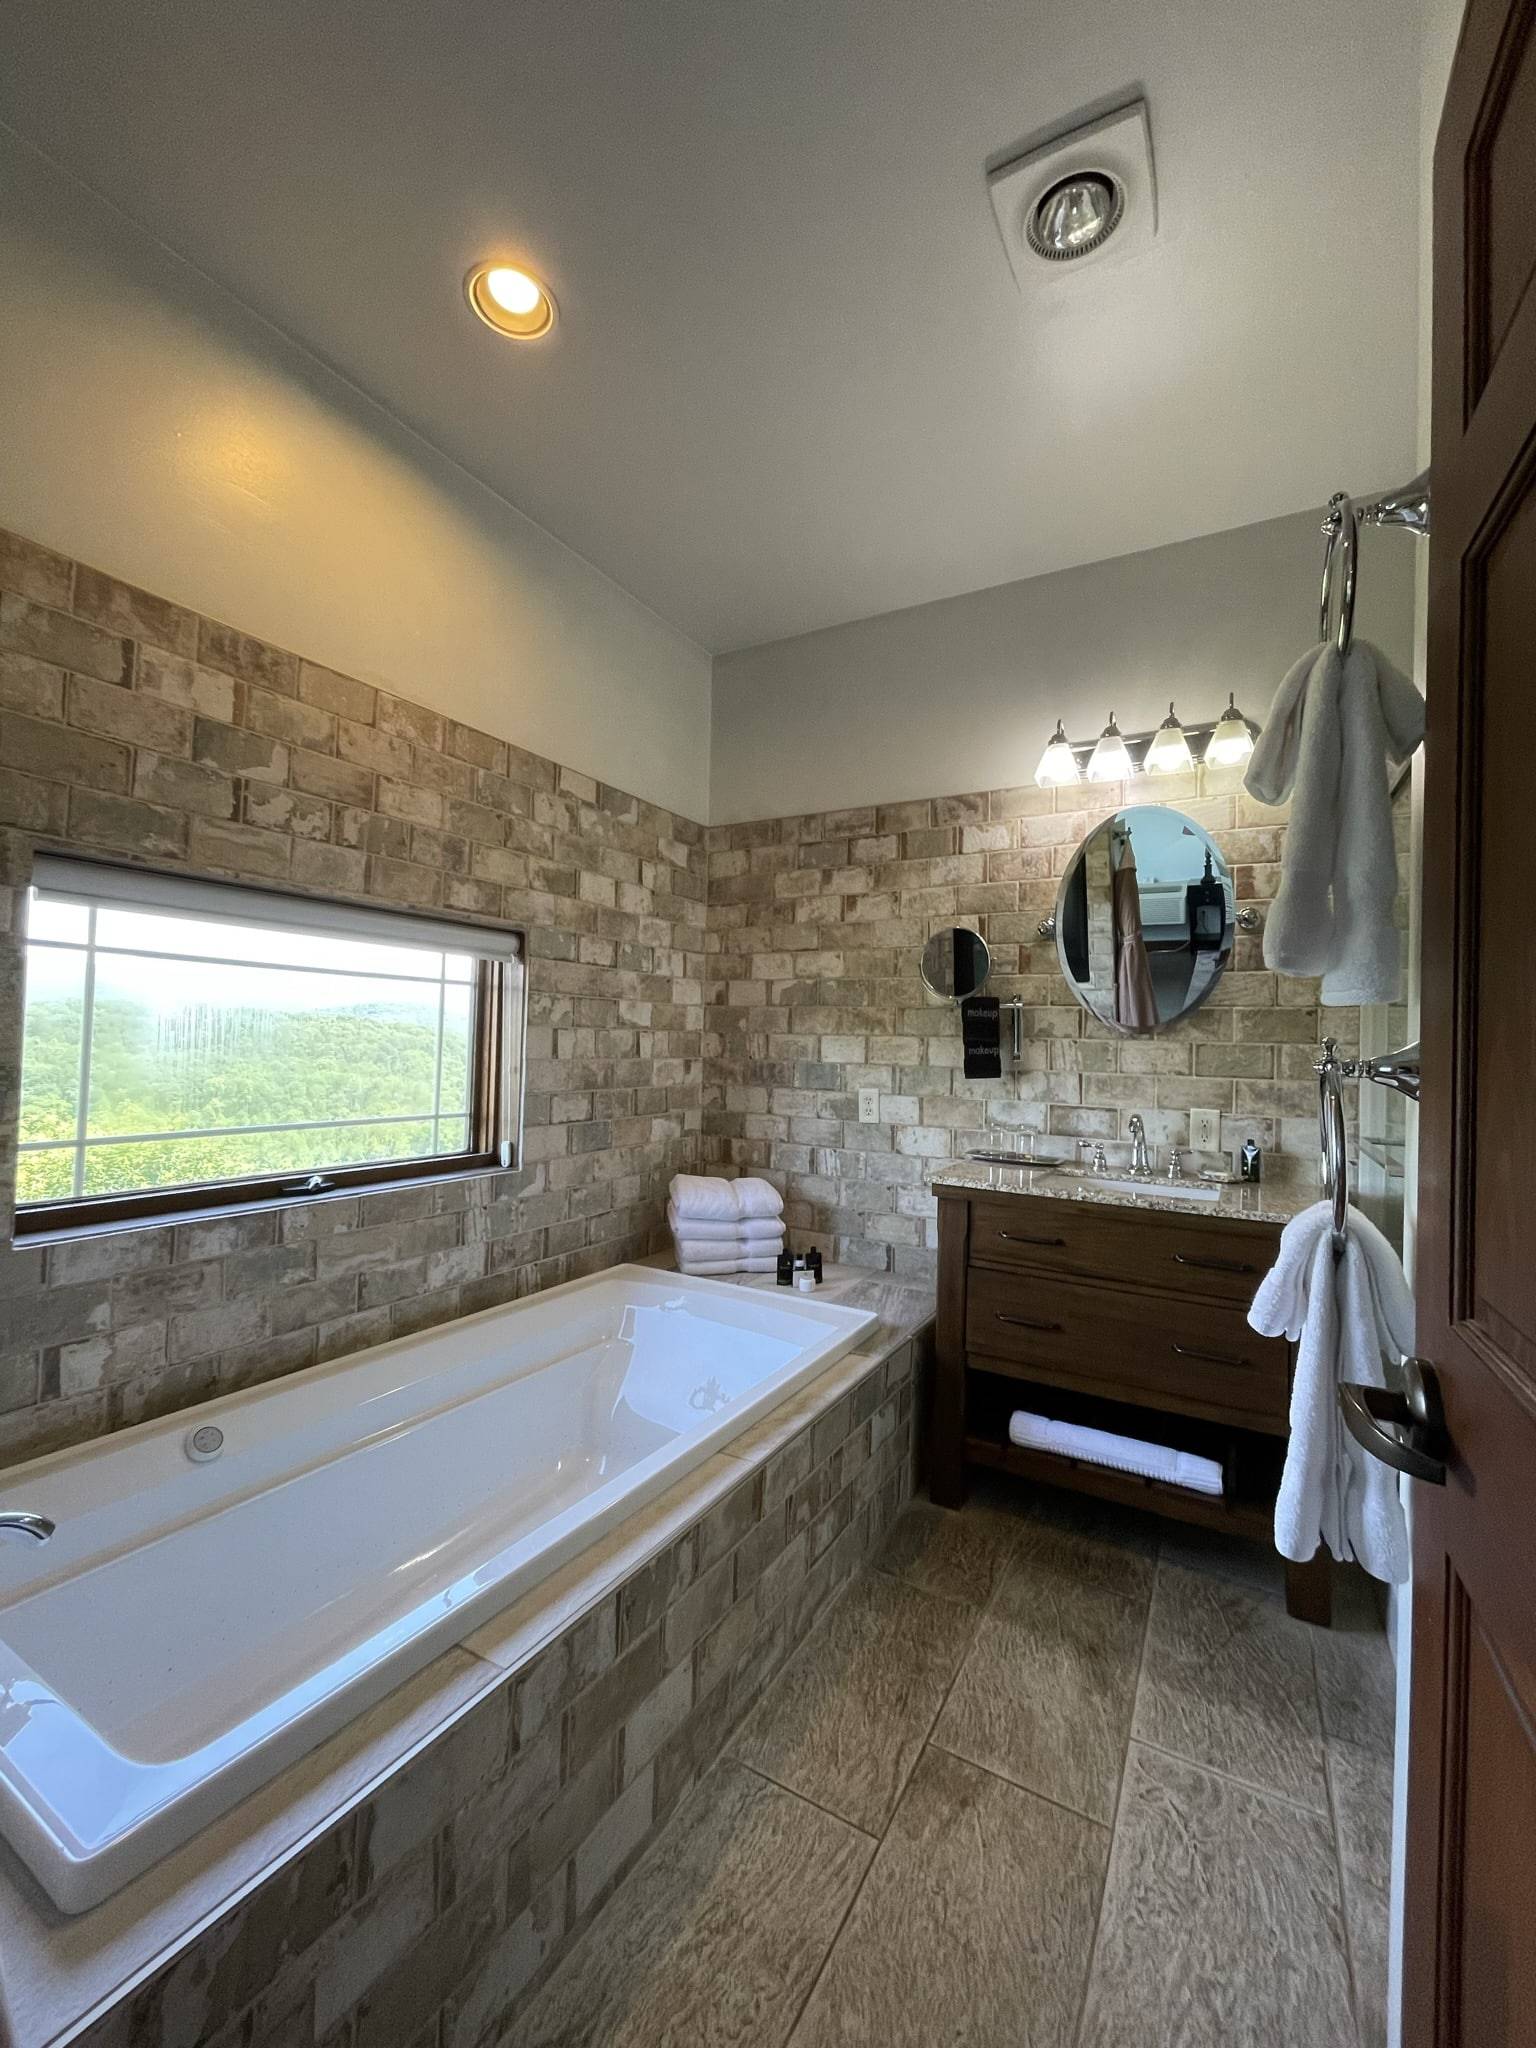 Bathroom sink with a wood cabinet, stone brick walls with a glass enclosed shower. Fluffy white towels sitting next to the soaking tub